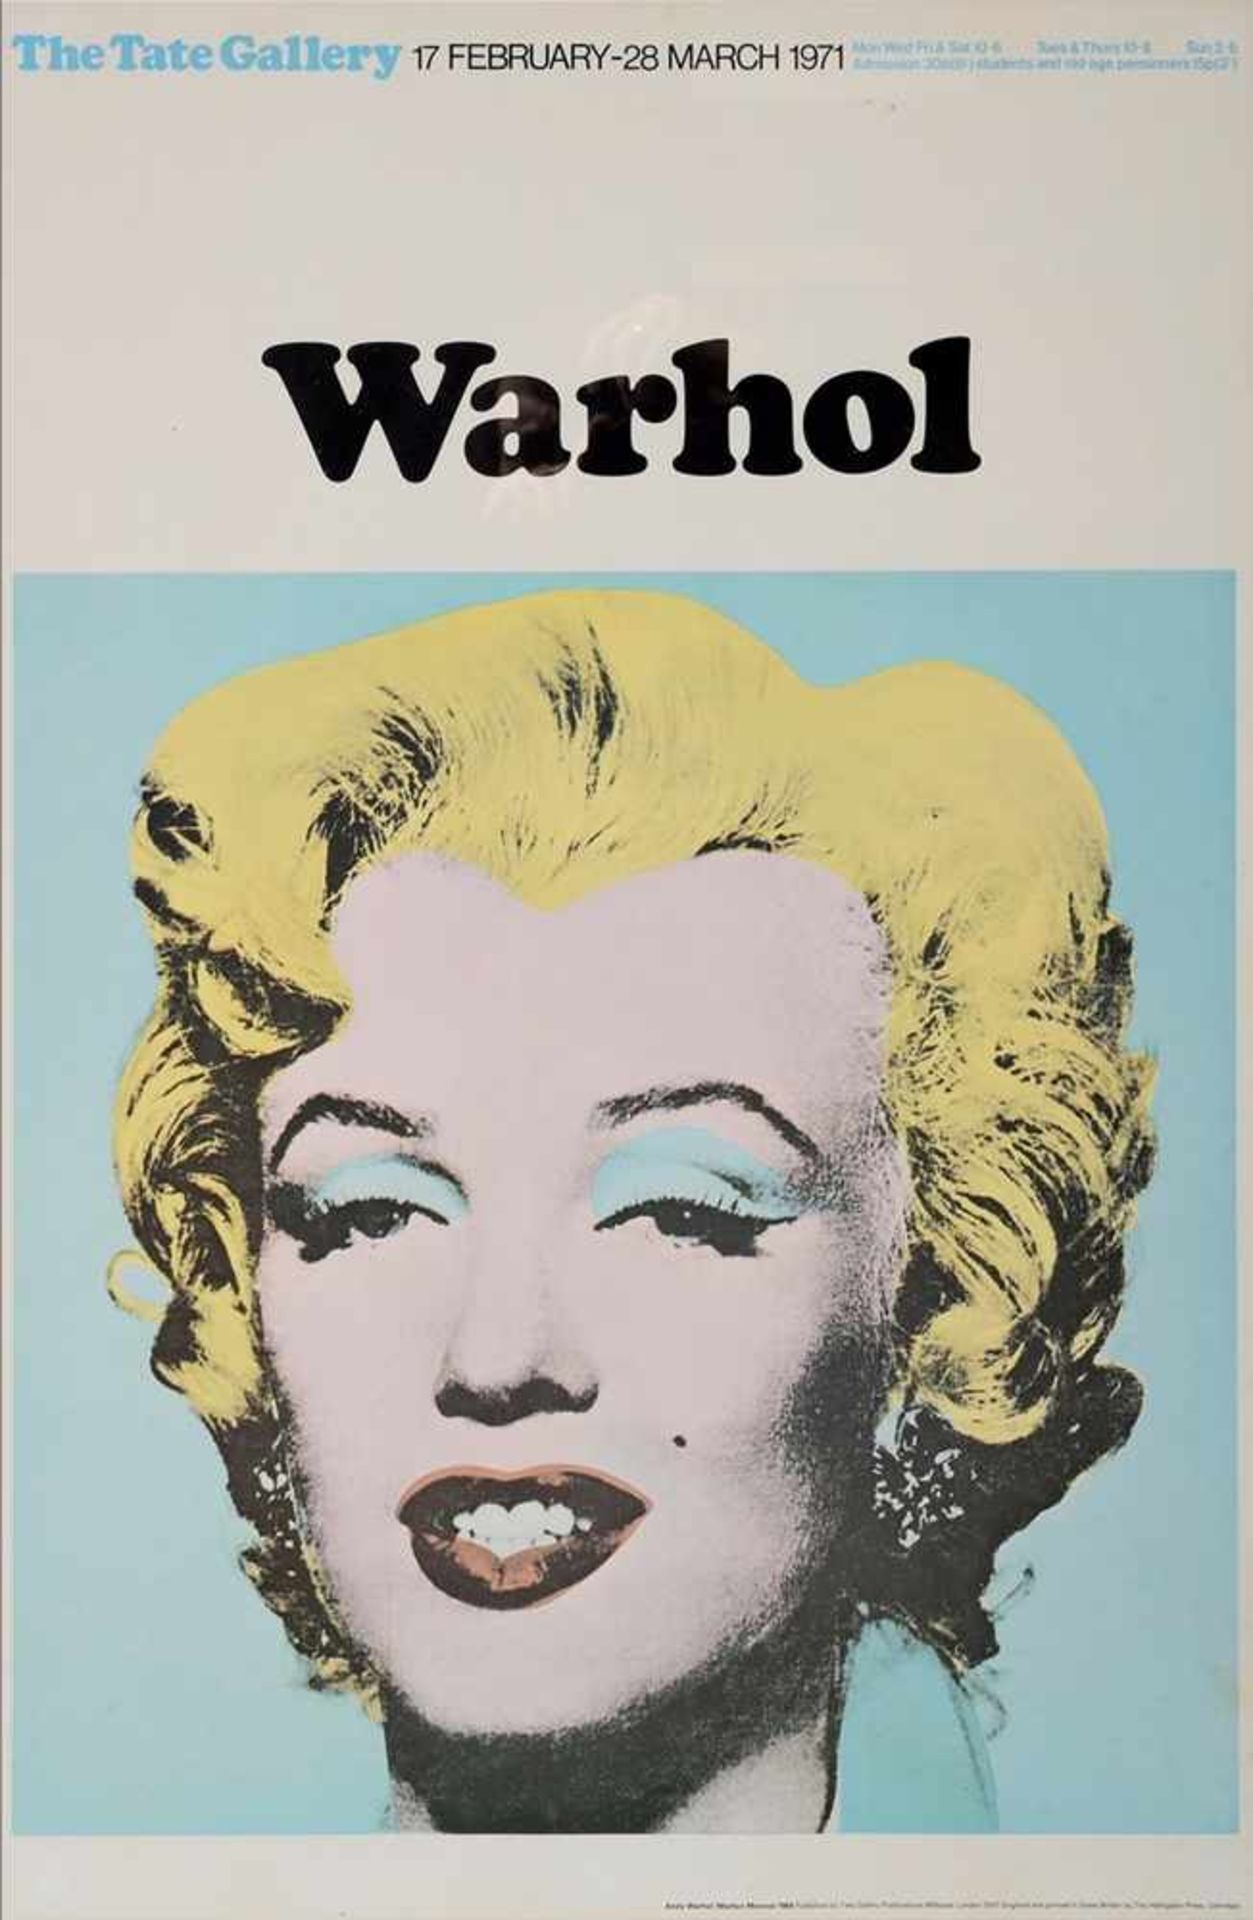 2 Diverse Warhol, Andy (1928-1987) "Turquoise Marilyn" Offsetlithographie Poster der Tate Gallery - Bild 2 aus 5